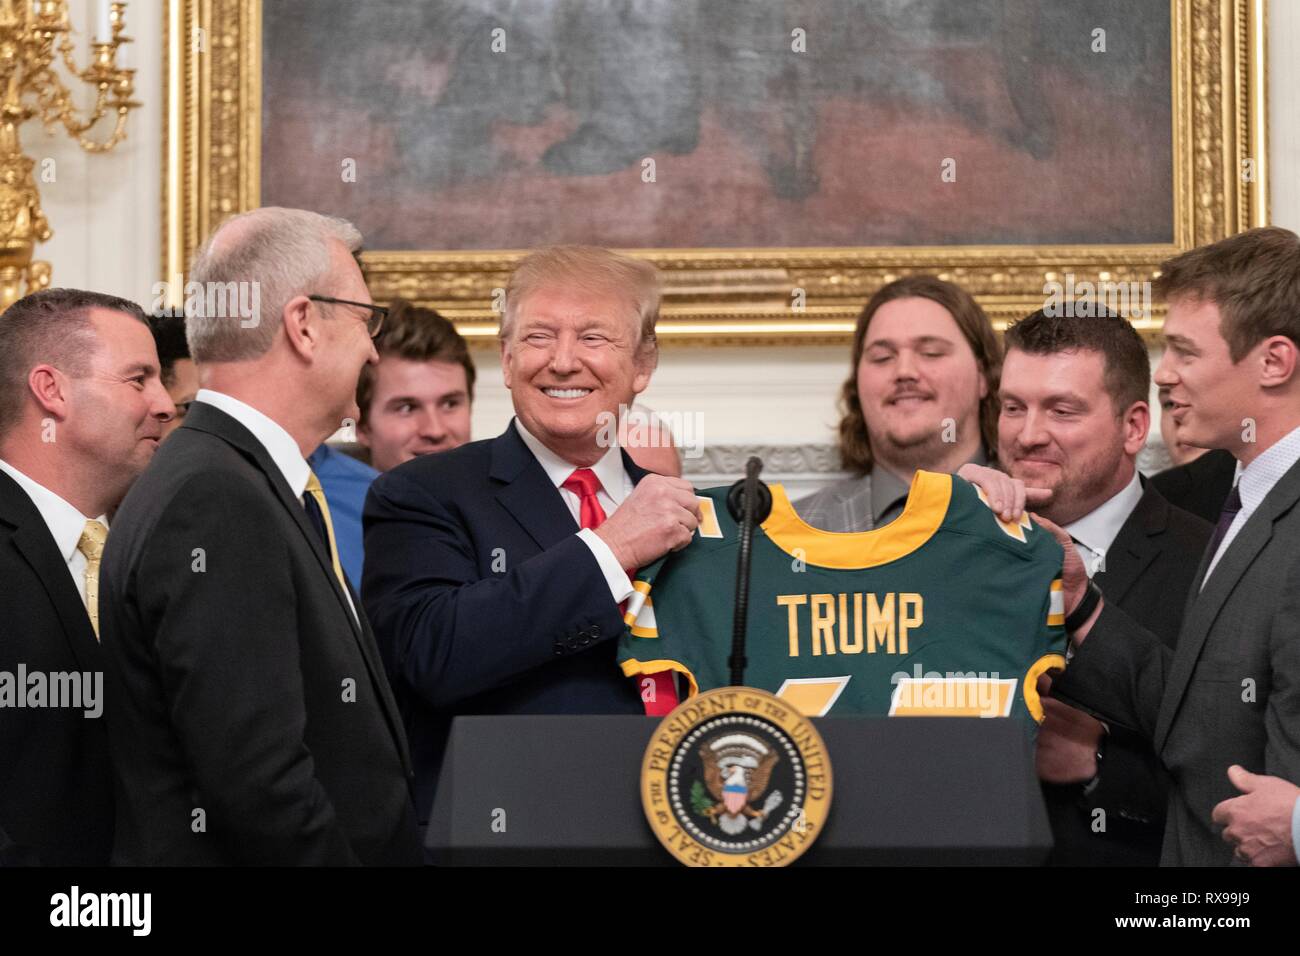 U.S President Donald Trump holds up a personalized college football jersey during a celebration with the 2018 FCS Division I Football National Champions the North Dakota Bisons in the State Dining Room of the White House March 4, 2019 in Washington, DC. Stock Photo